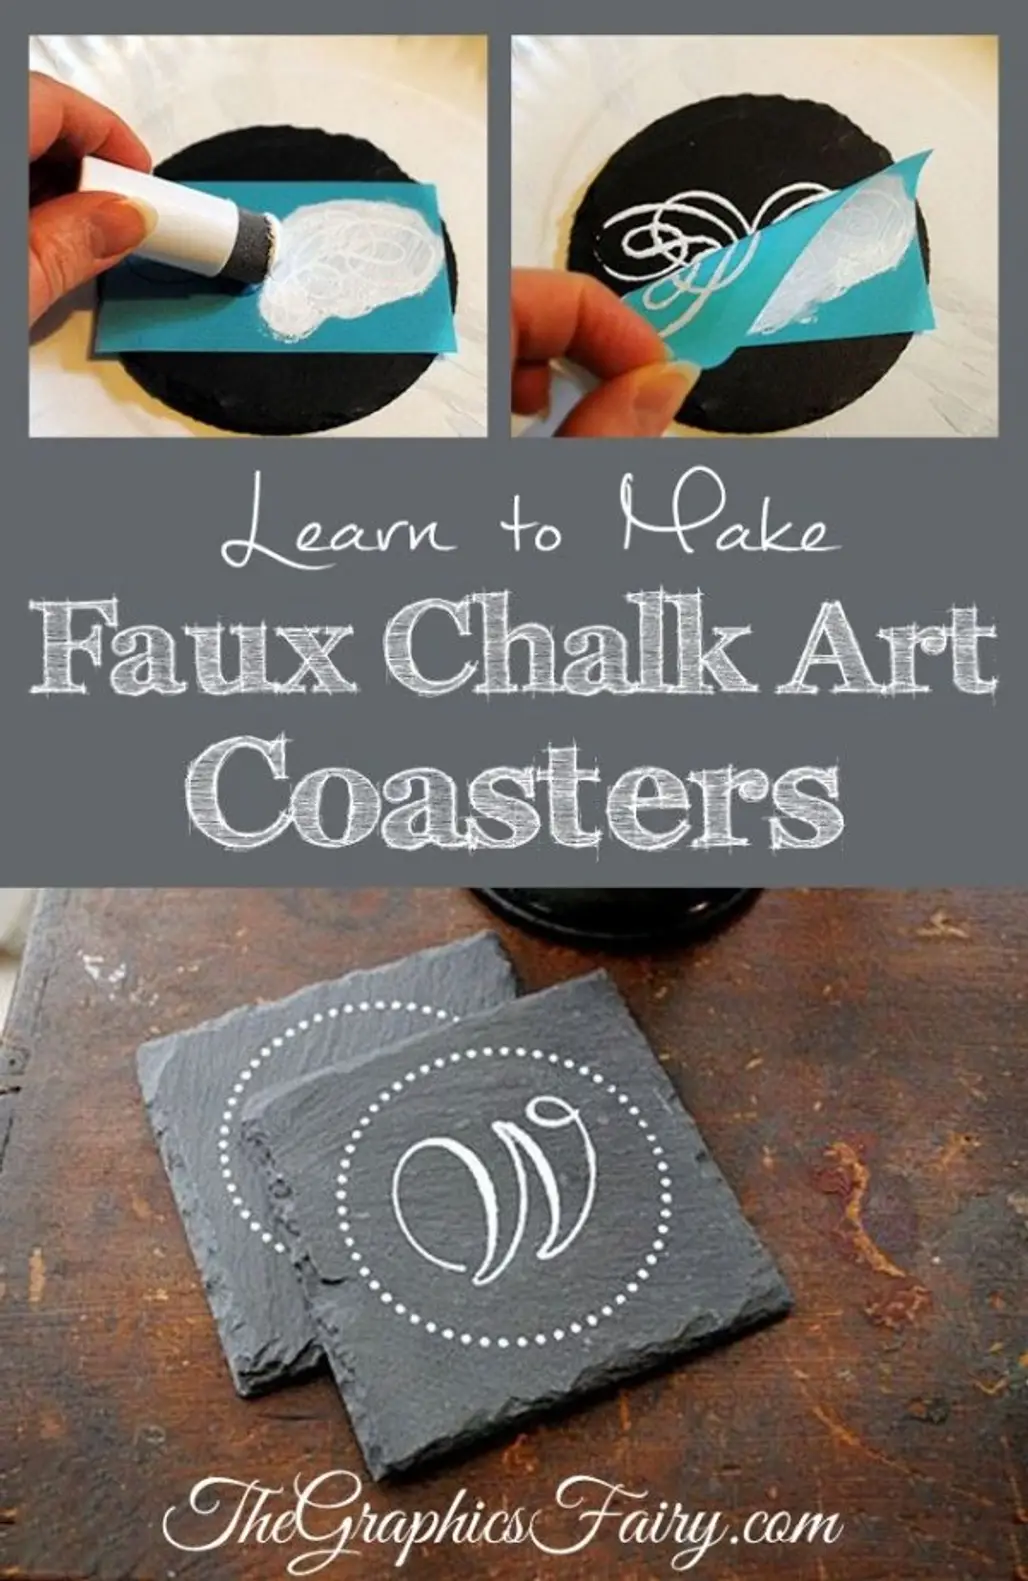 How to Make Faux Chalk Art Coasters